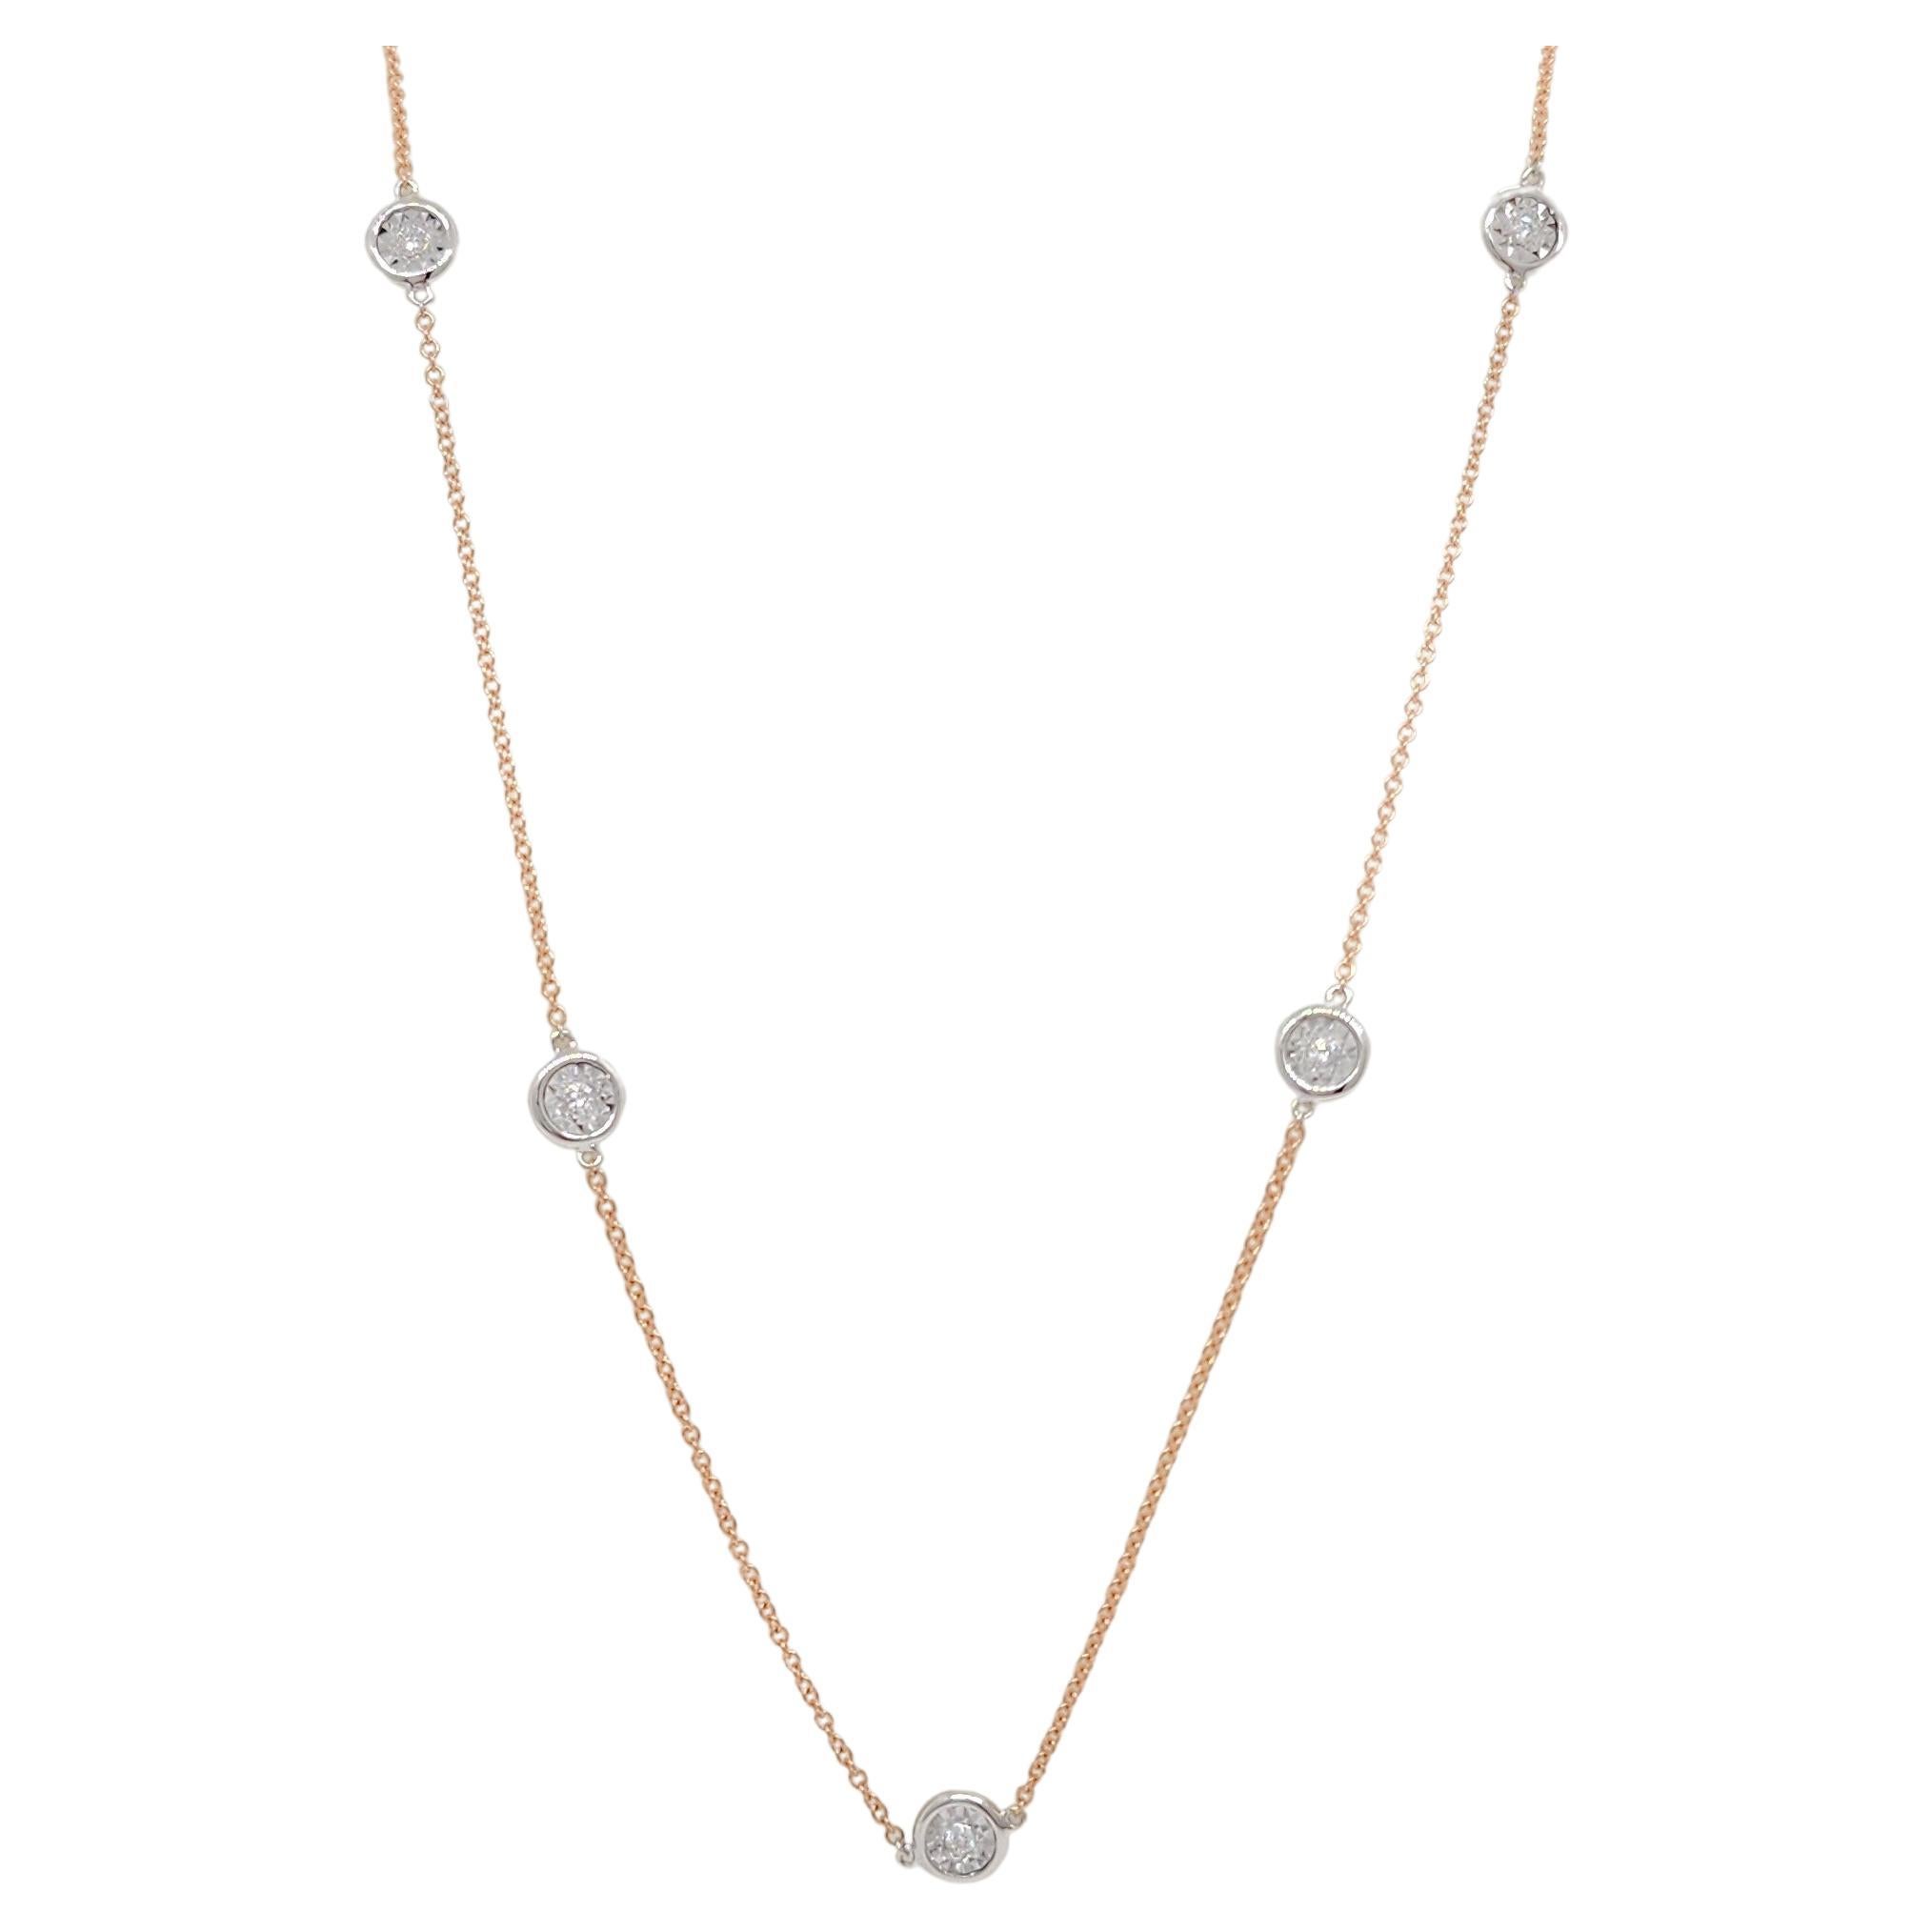 White Diamond Bezel and Chain Necklace in 14k Rose and White Gold